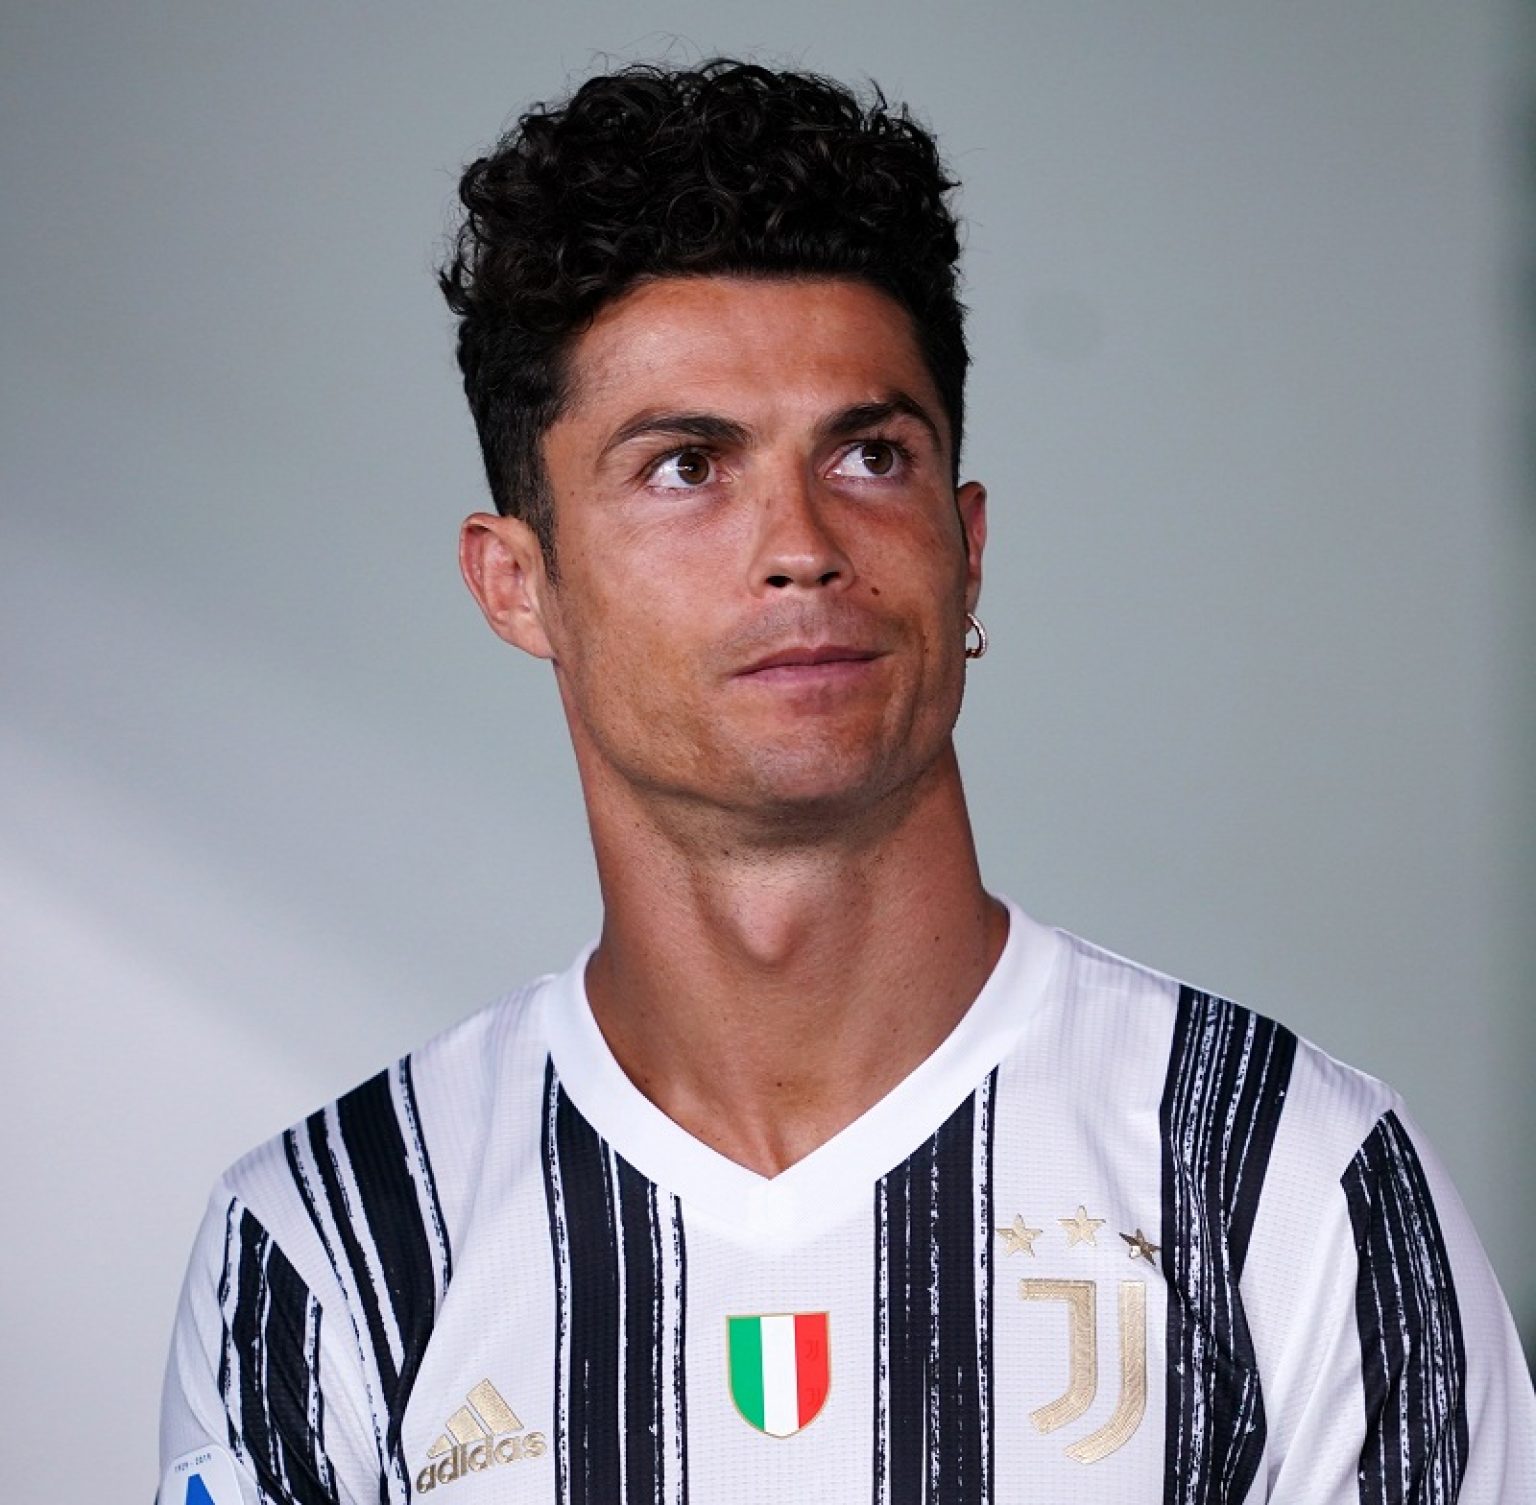 Cristiano Ronaldo Jr Curly Hair Best Hairstyles Ideas for Women and